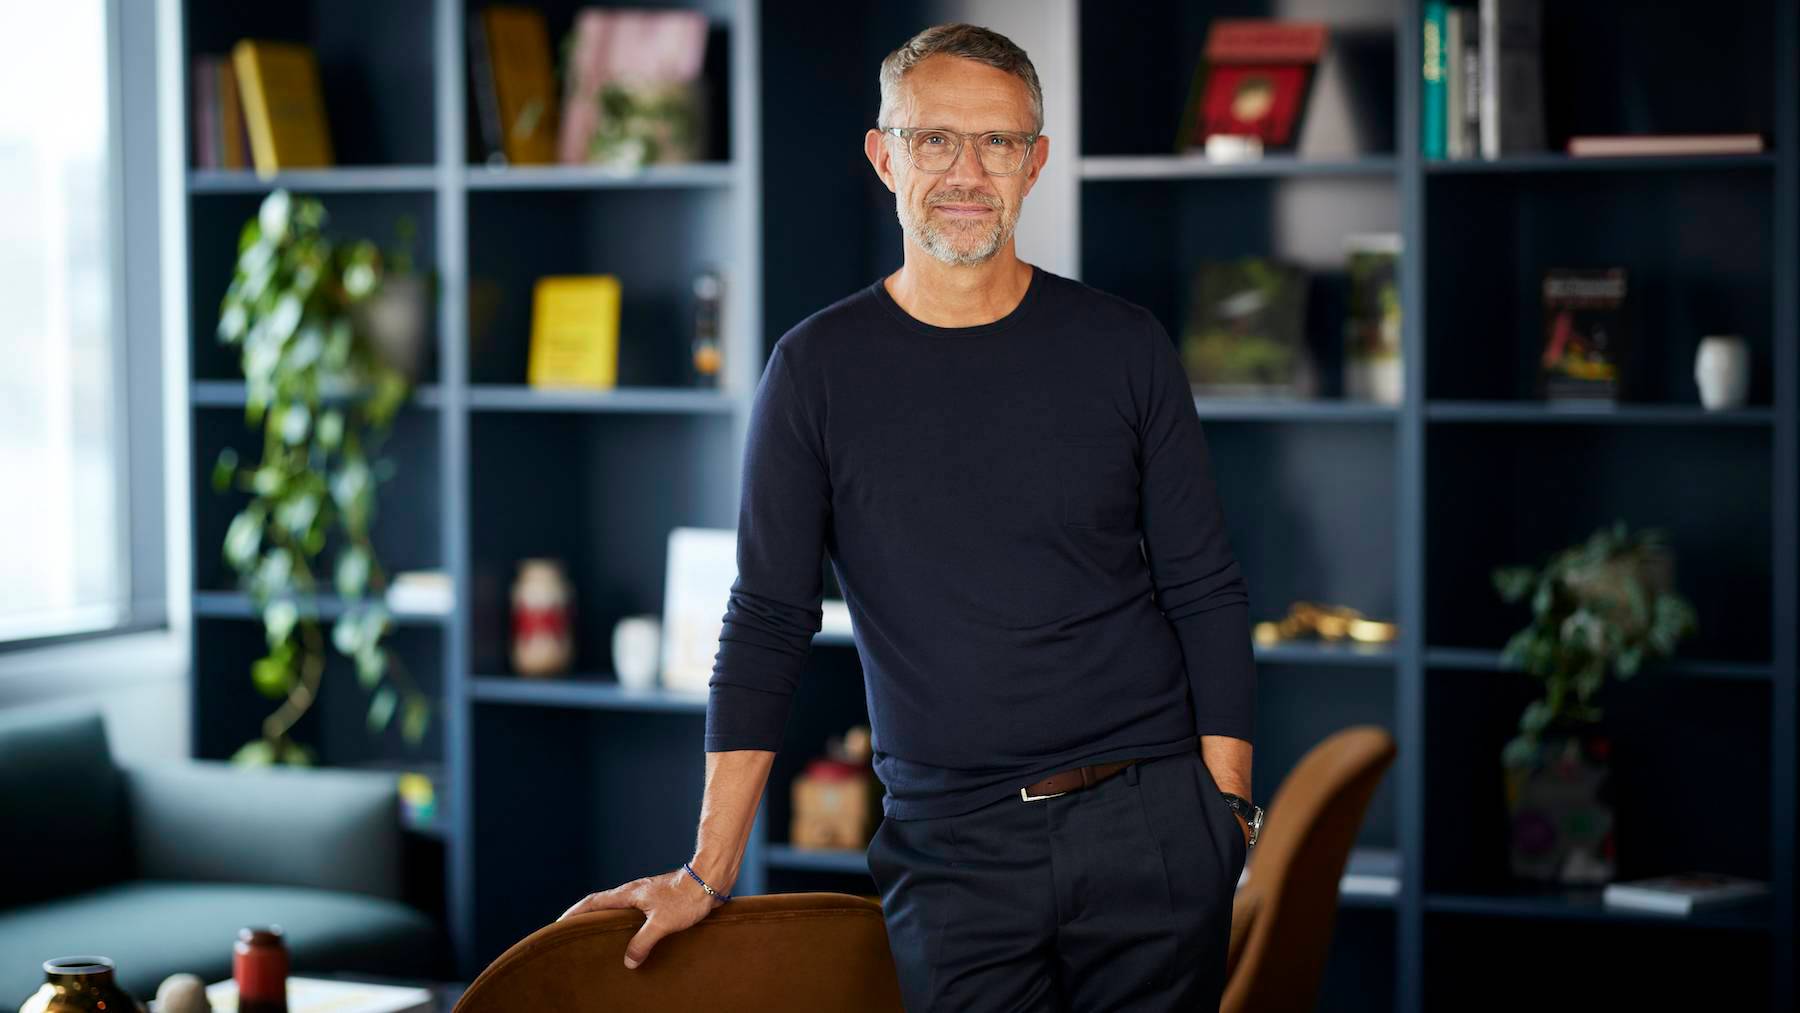 David Pemsel, CEO of communications agency ScienceMagic.Inc, has been appointed the new chairman of the British Fashion Council.